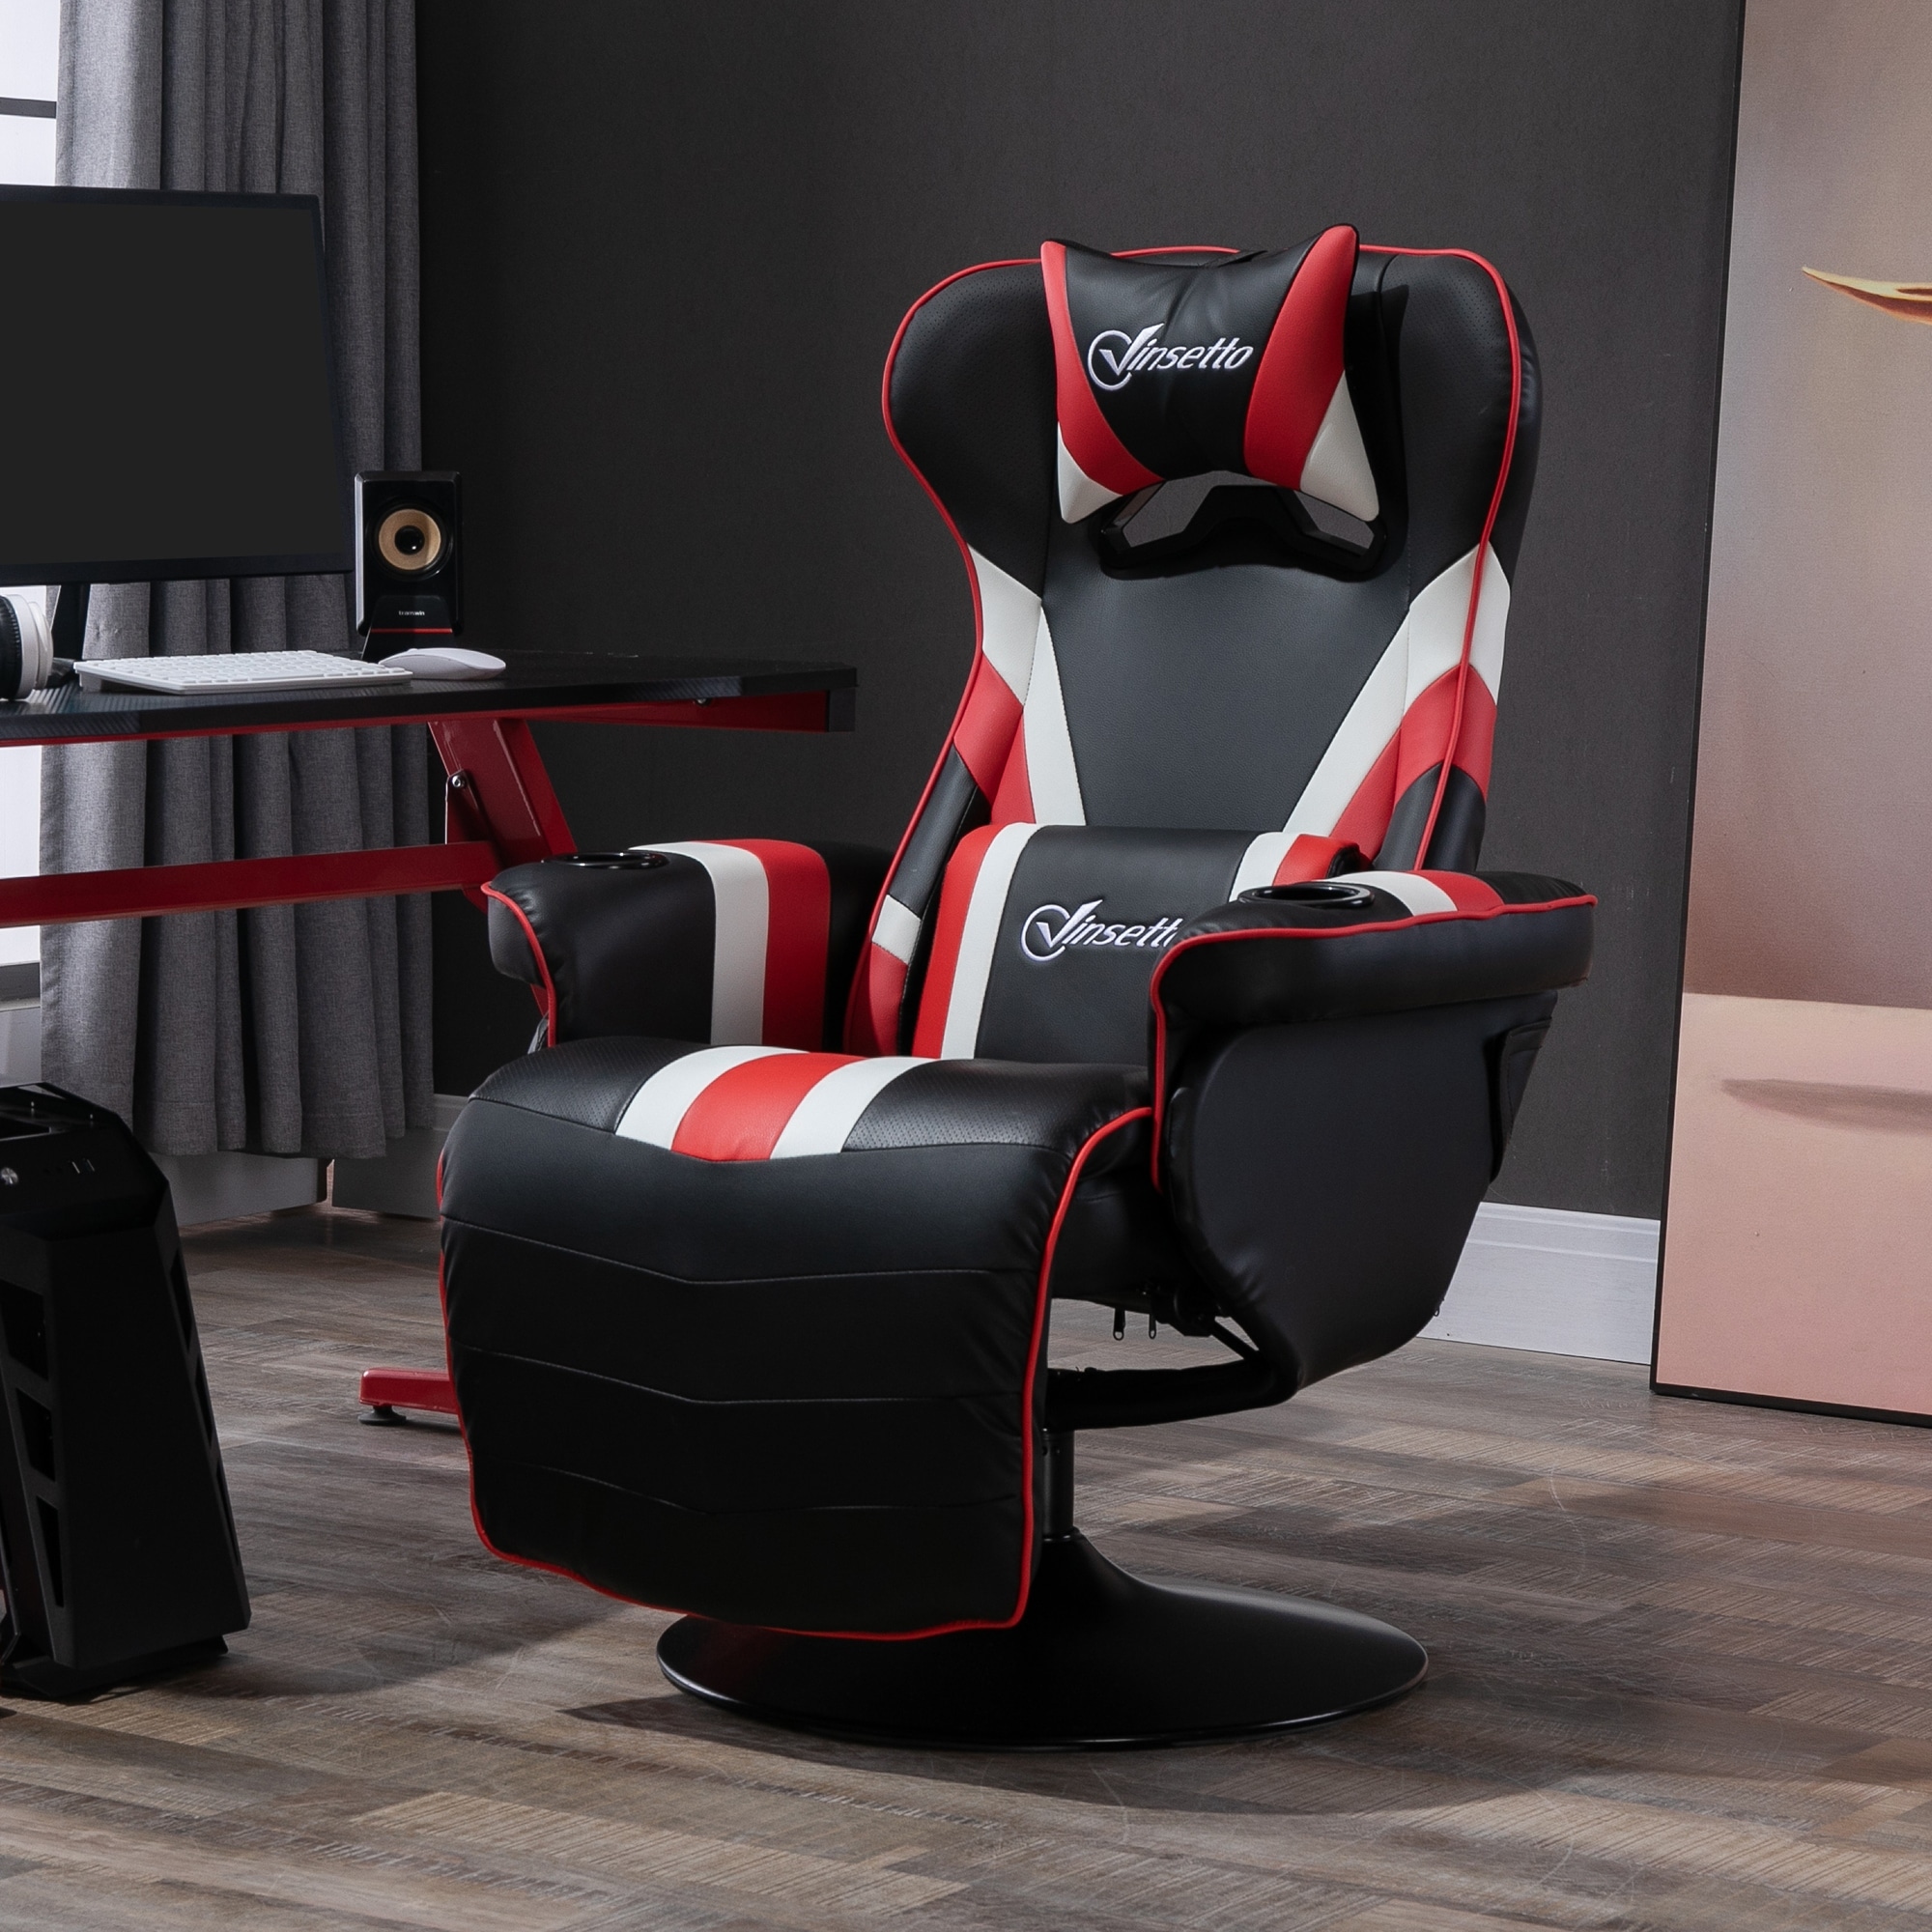 https://ak1.ostkcdn.com/images/products/is/images/direct/1cd568ad5f8bb46a8cb4eaba33074cdb55145bc5/Vinsetto-Race-Video-Game-Chair-with-Reclining-Backrest-and-Footrest%2C-Headrest%2C-and-Cup-Holder.jpg